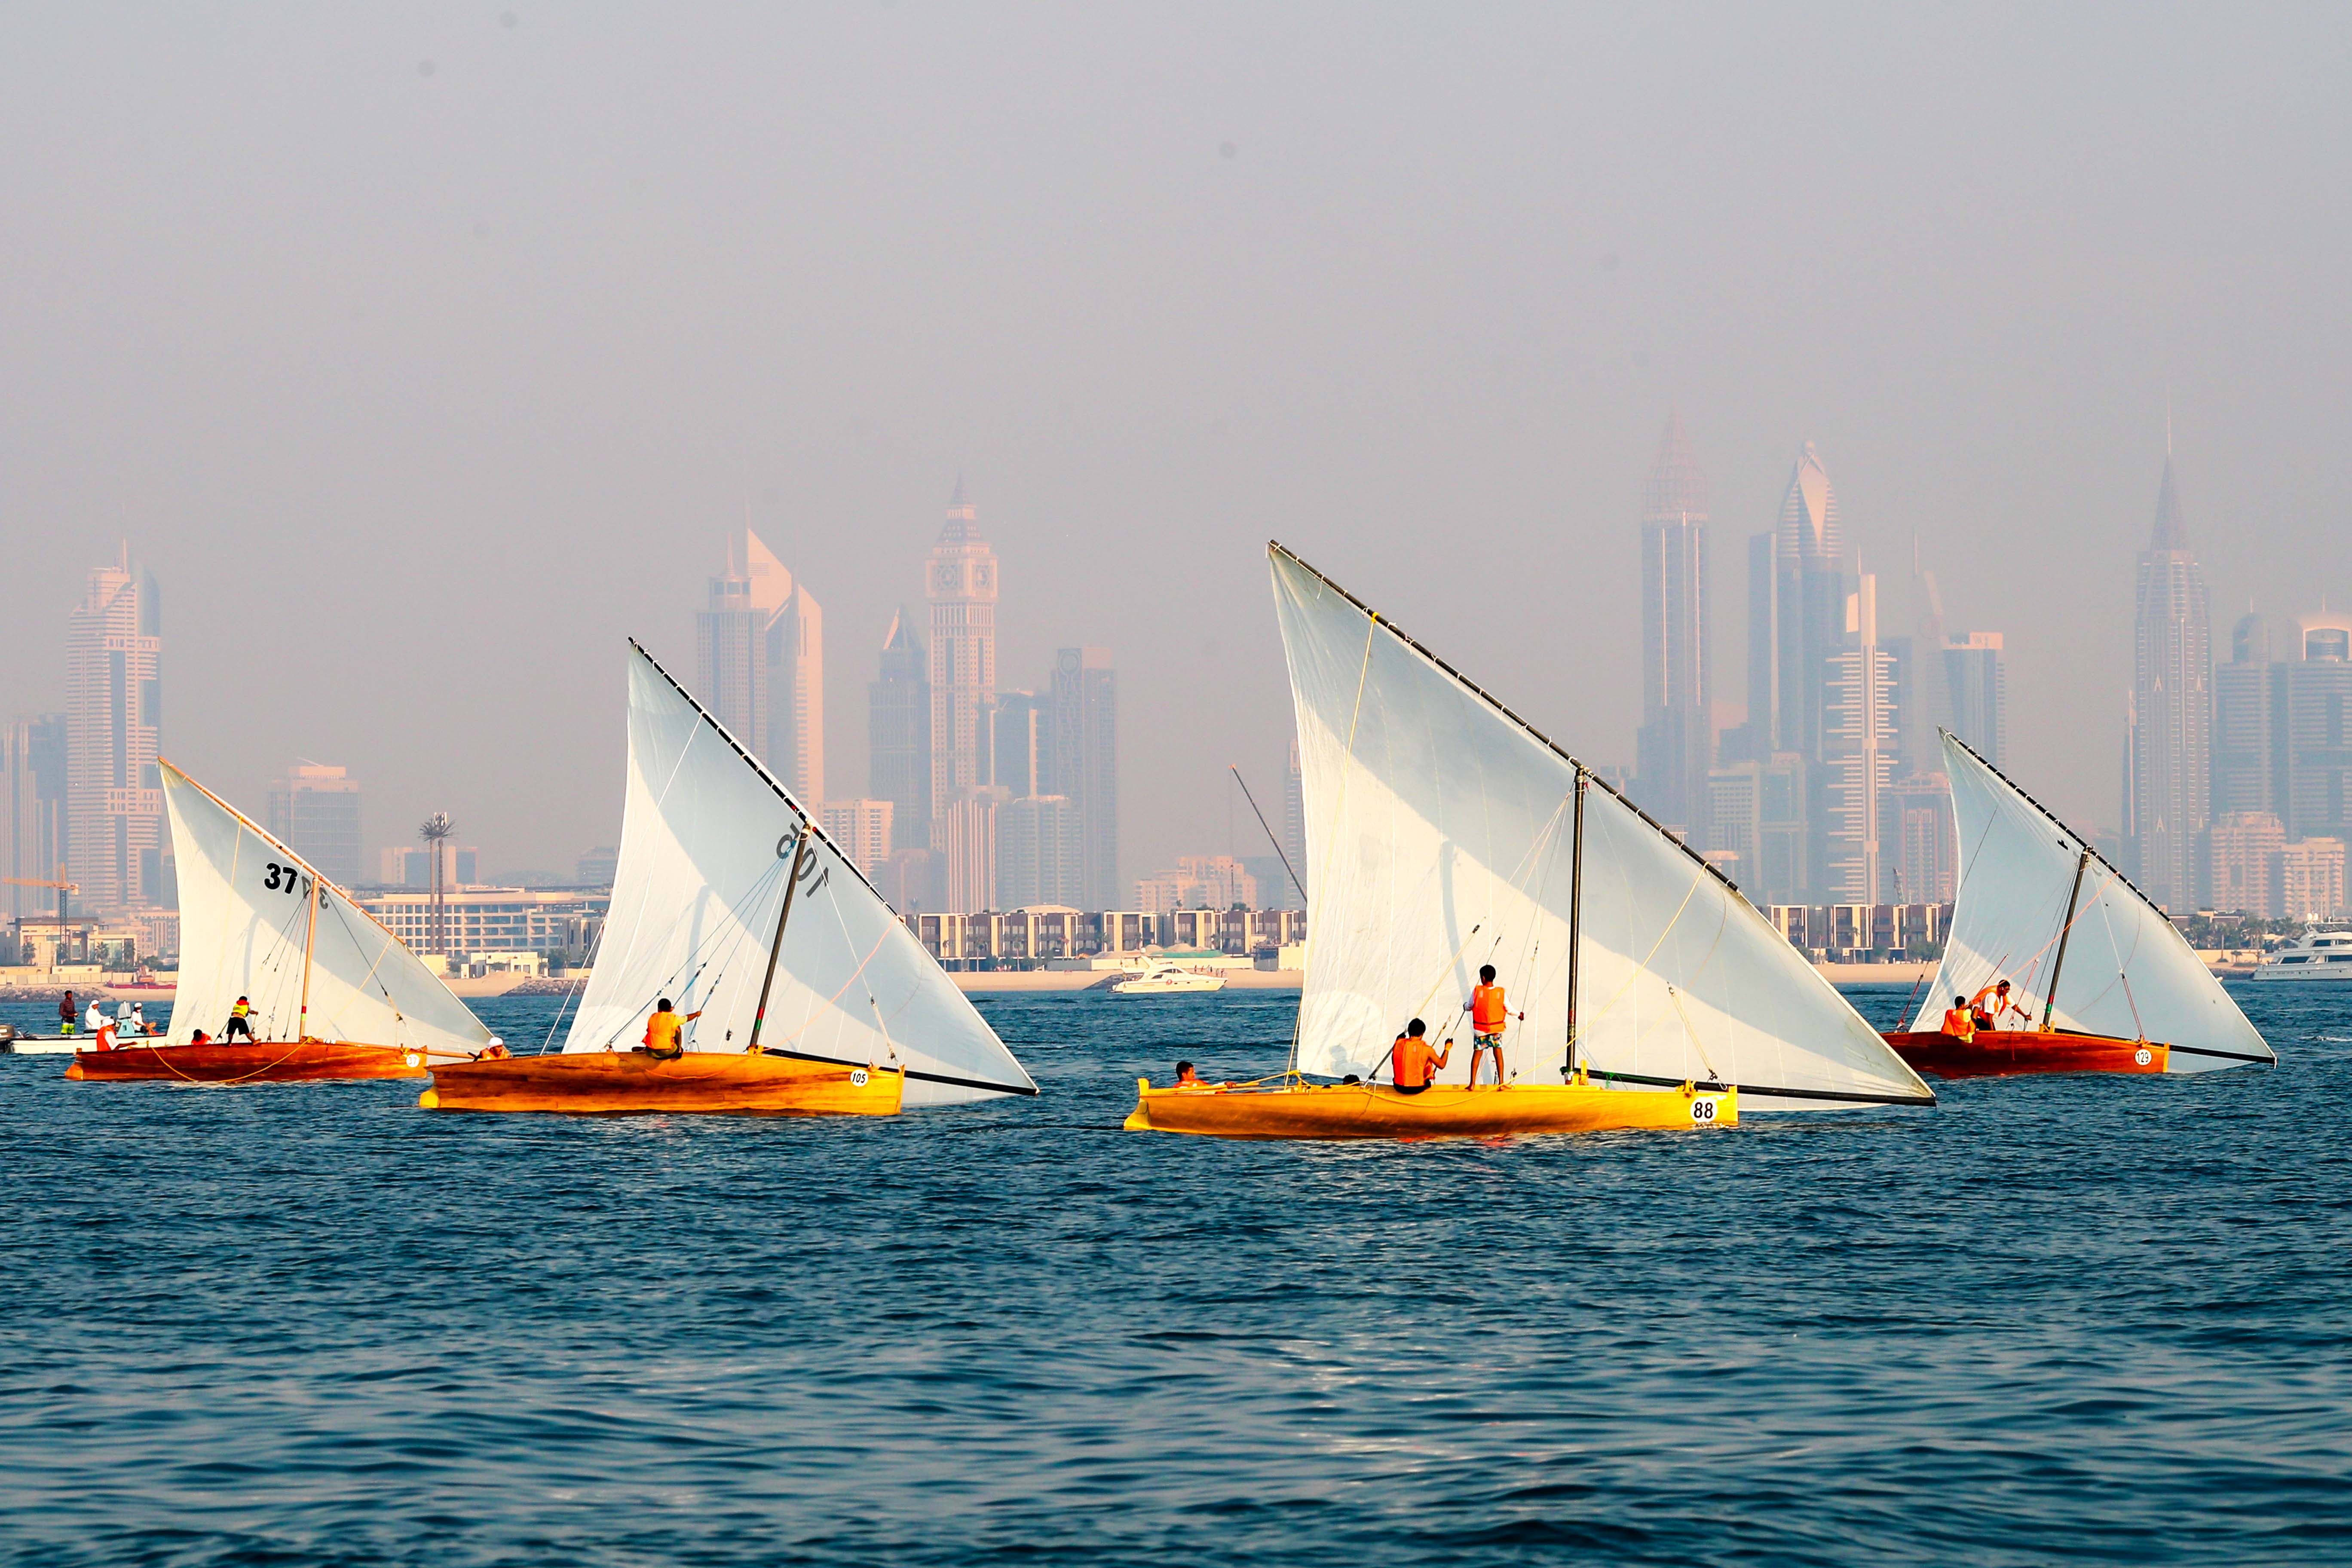 New Season Takes Off on Saturday with the 22ft Dhow Sailing Race